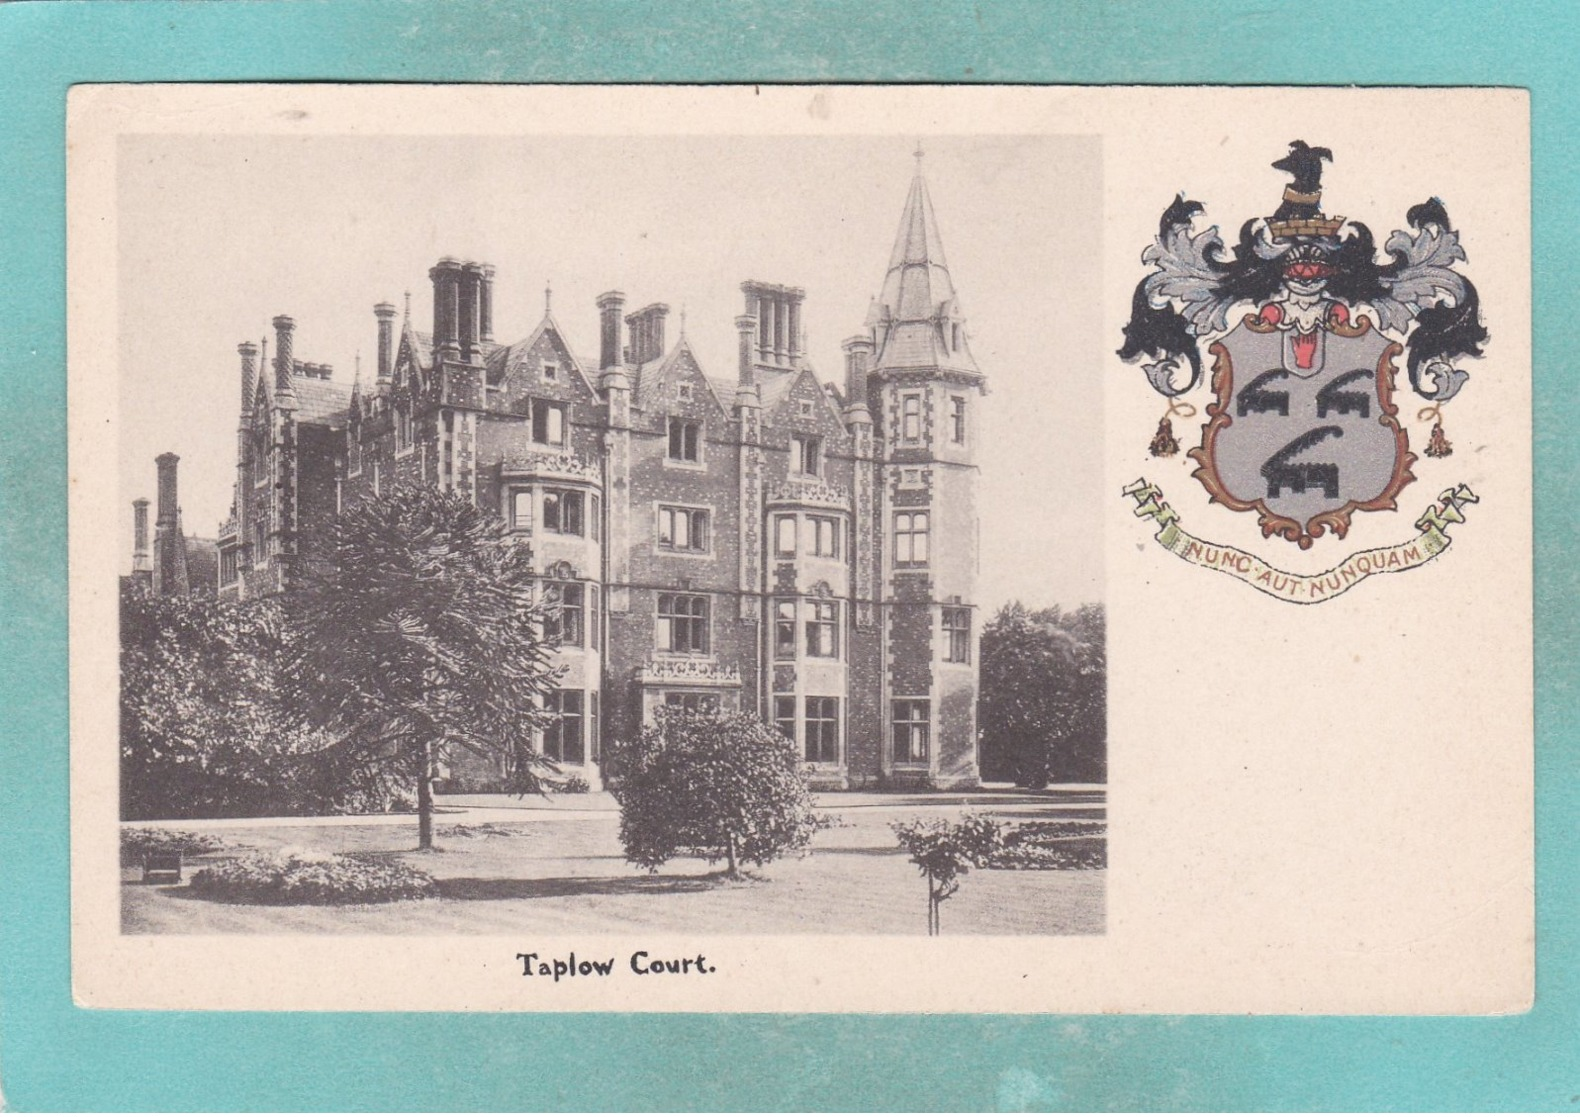 Small Post Card With Coat Of Arms Of Taplow Court,Buckinghamshire, England,S71. - Buckinghamshire